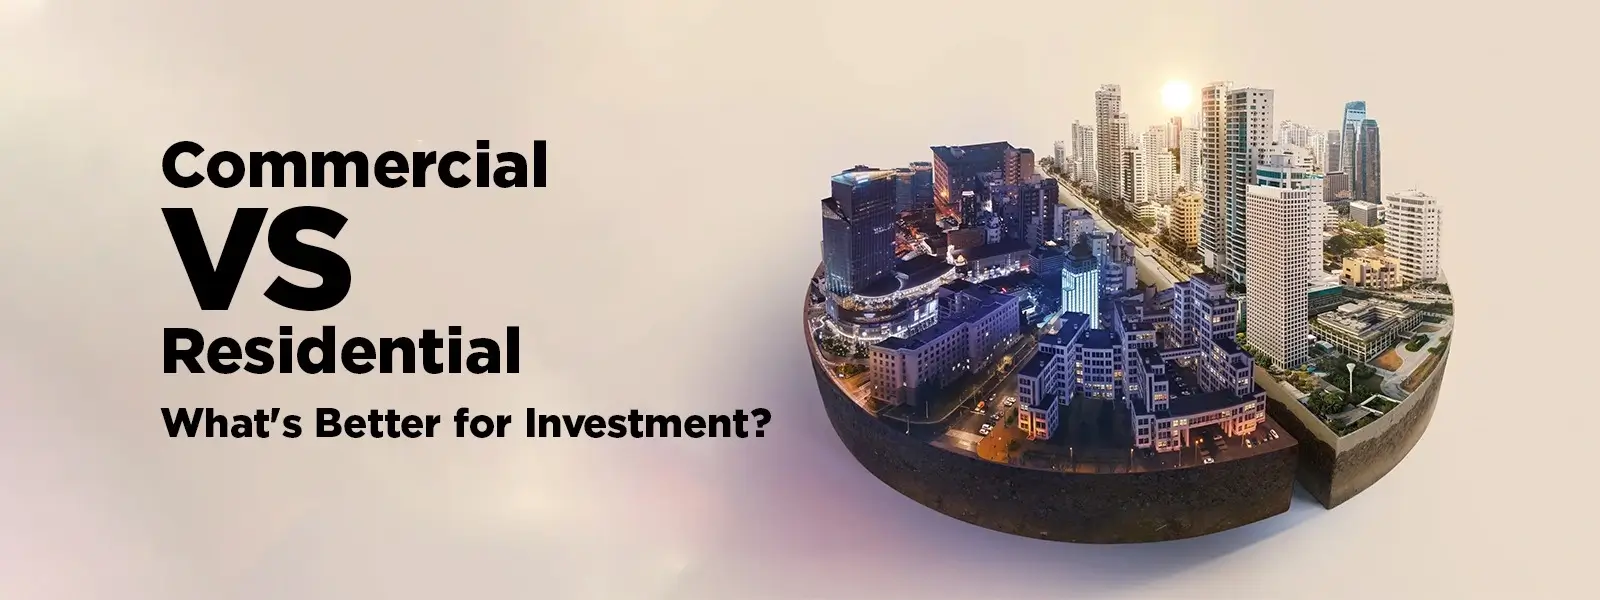 Commercial and Residential property Investments